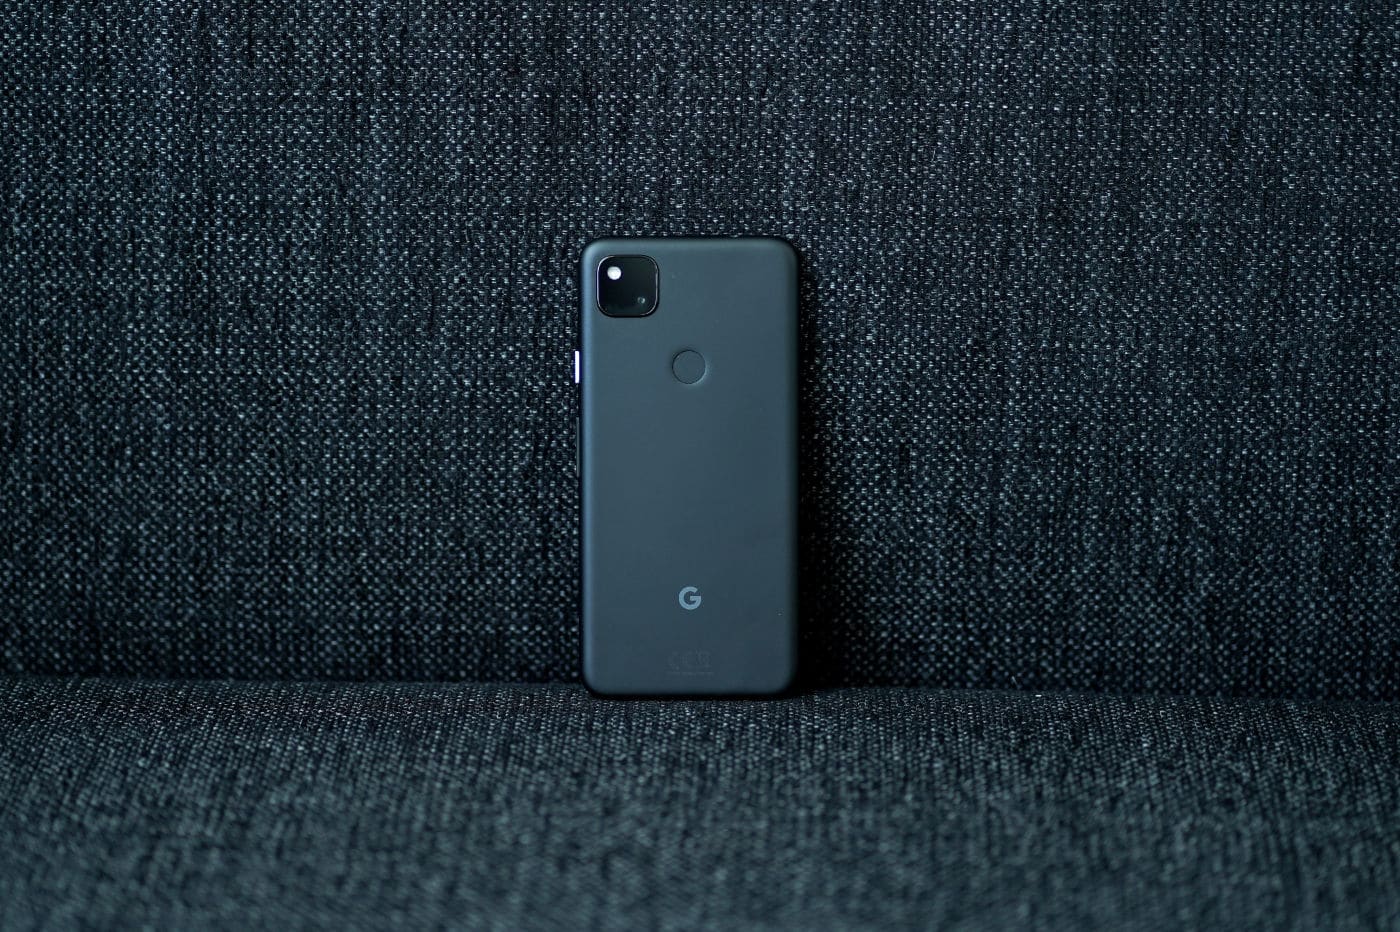 Gabari Pixel 4a - Google Pixel 4a price in Nigeria, review, and full specs